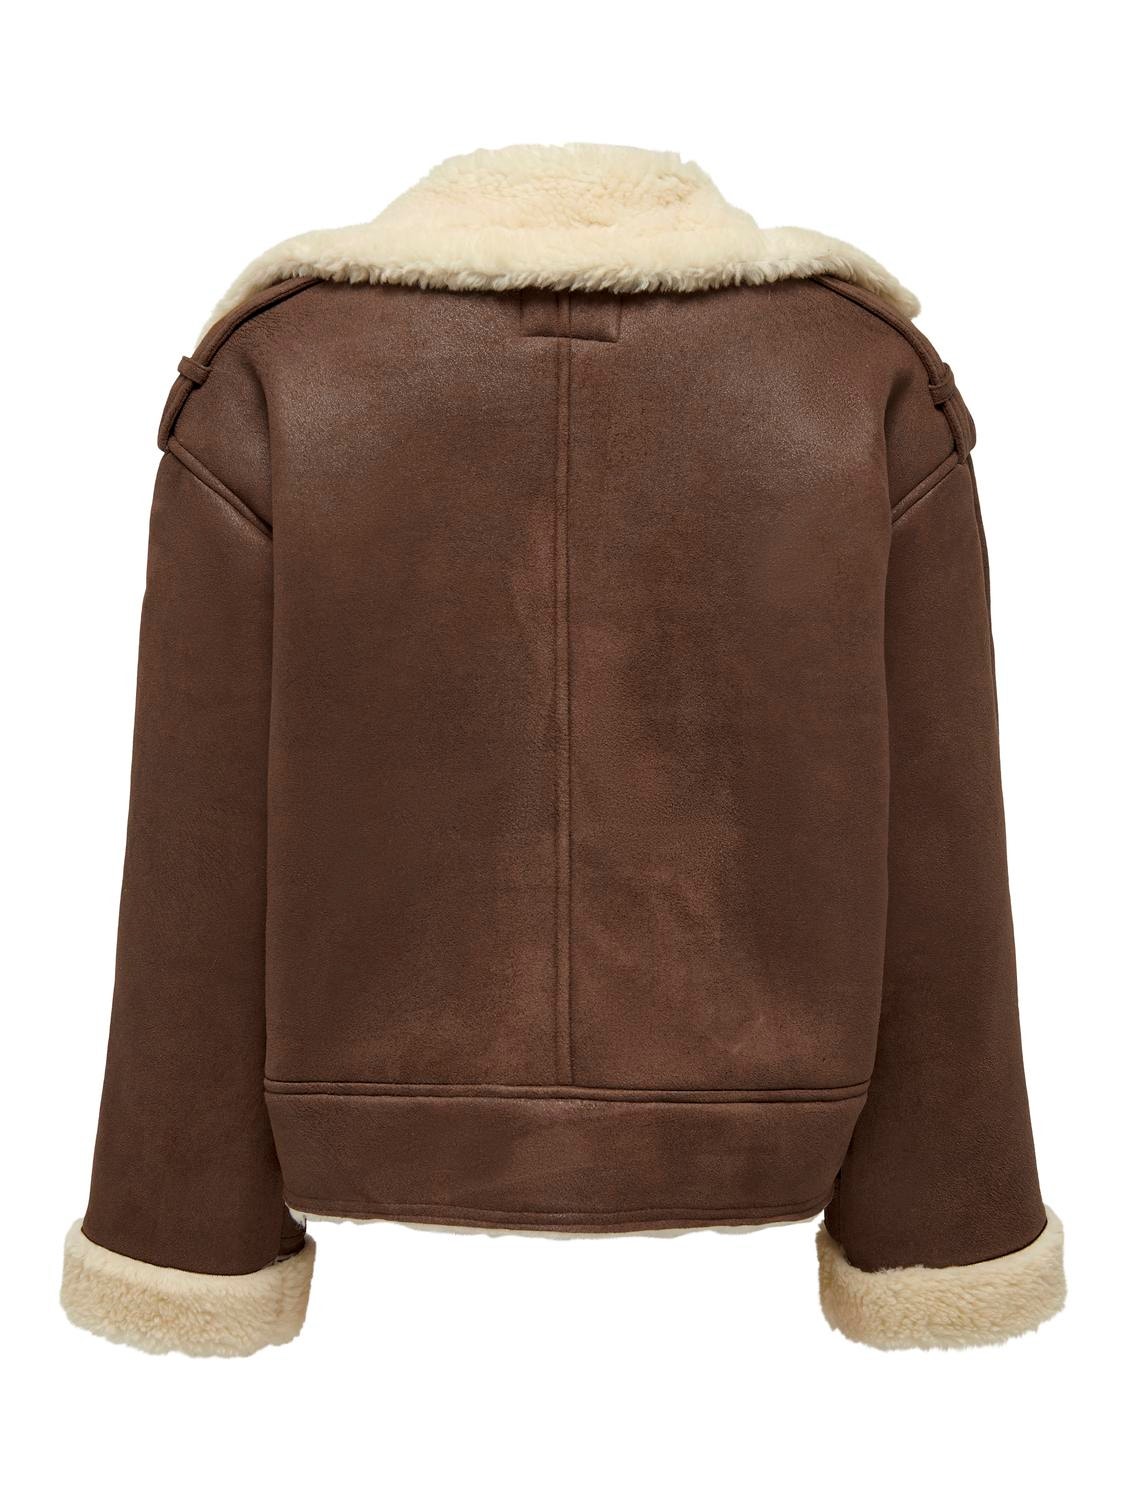 ONLY Aviator Bonded Jacket -Toasted Coconut - 15293012